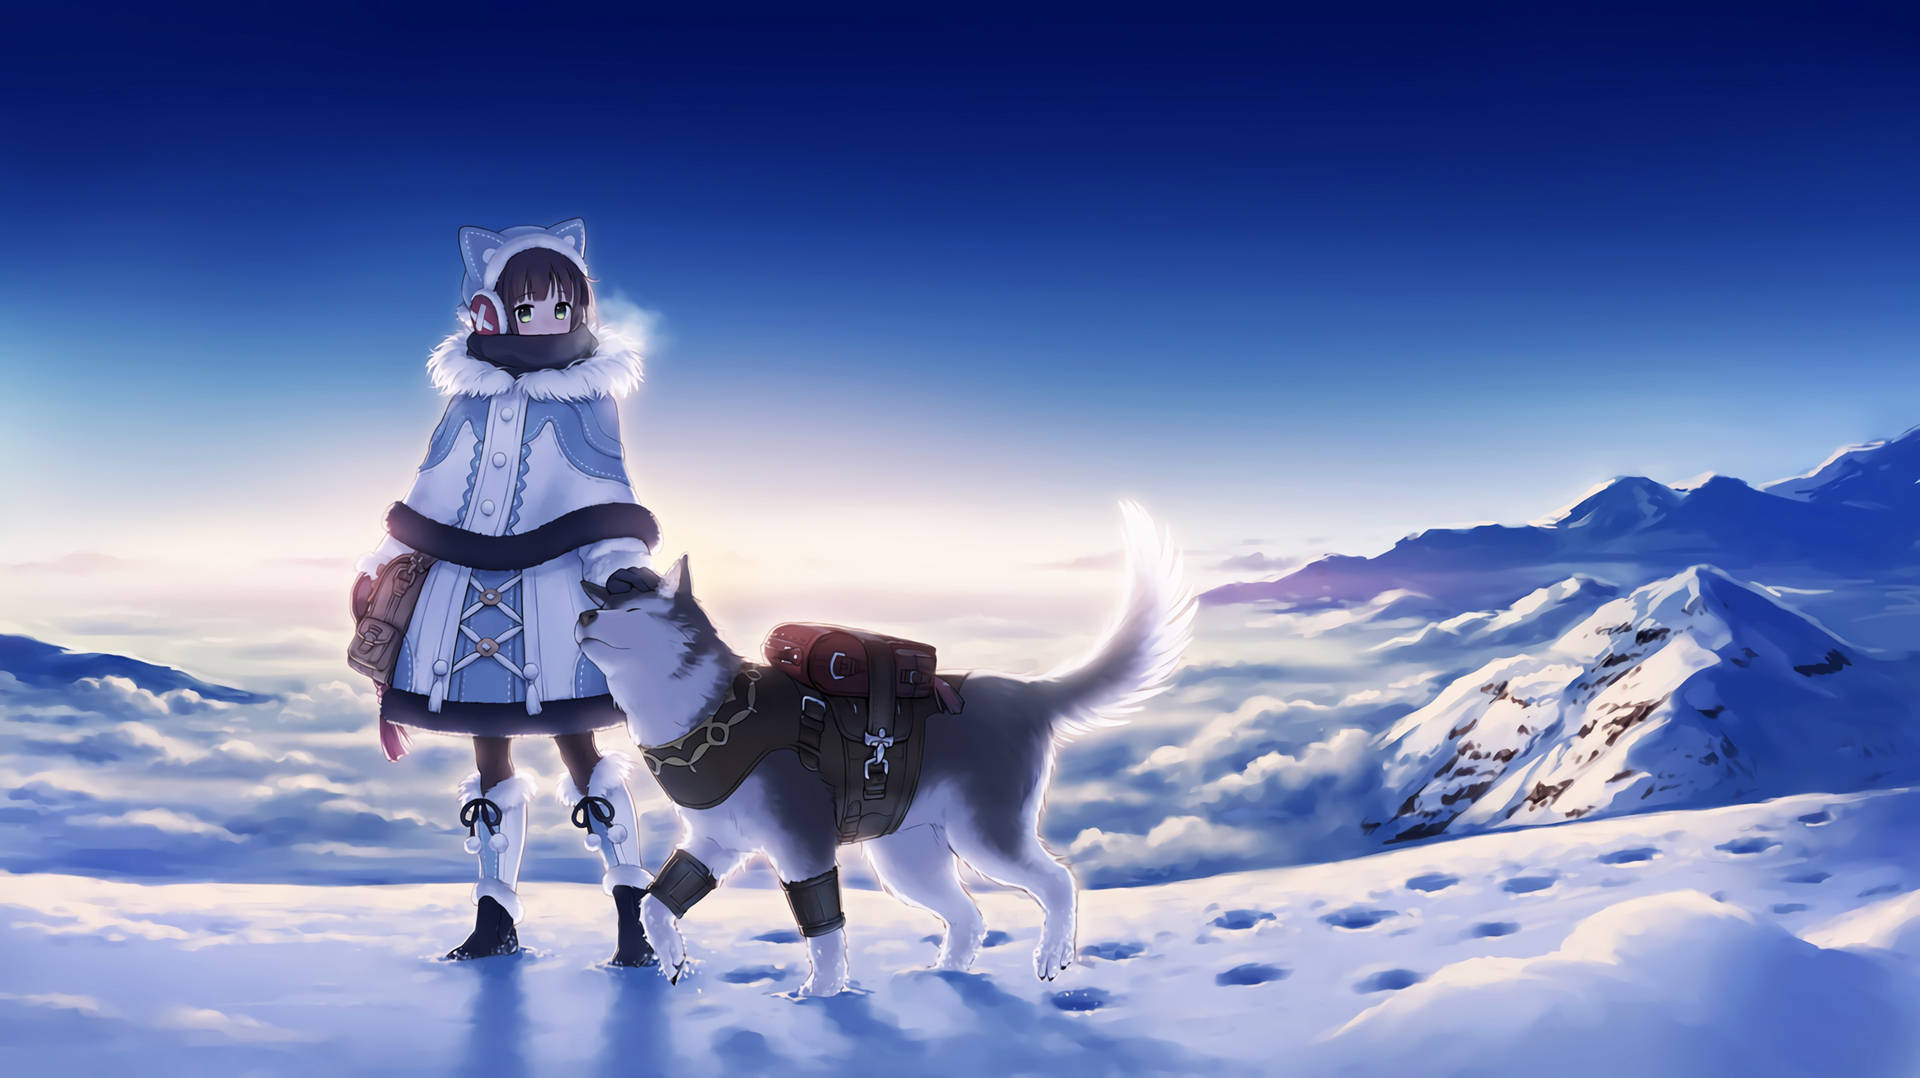 Download Snow Mountain Dog And Girl Wallpaper | Wallpapers.com